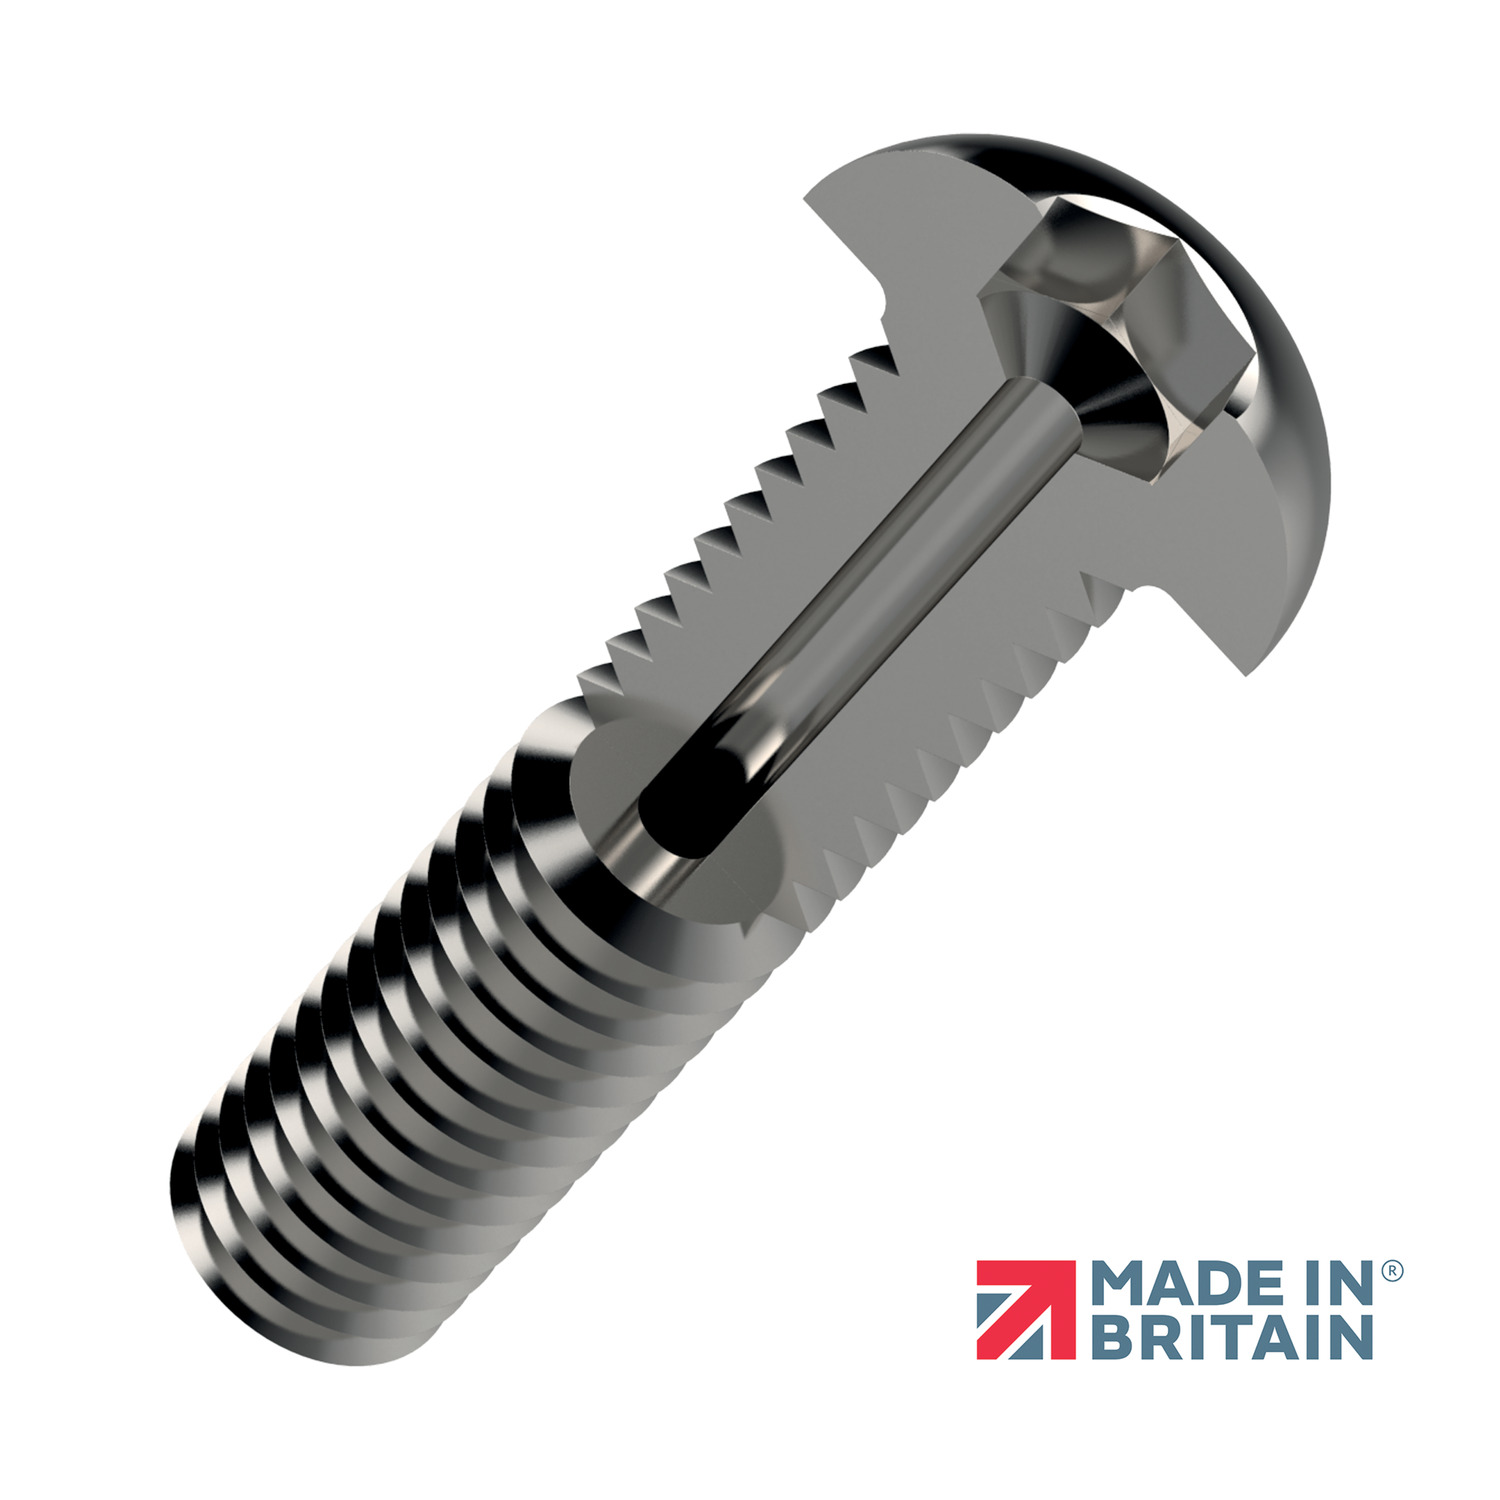 Vented Screws -  Socket Button Head Socket button head vented screw available in AISI 304 or "marine-grade" 316 series stainless steel, which is extra corrosion resistant. With allen or hexagonal drive.